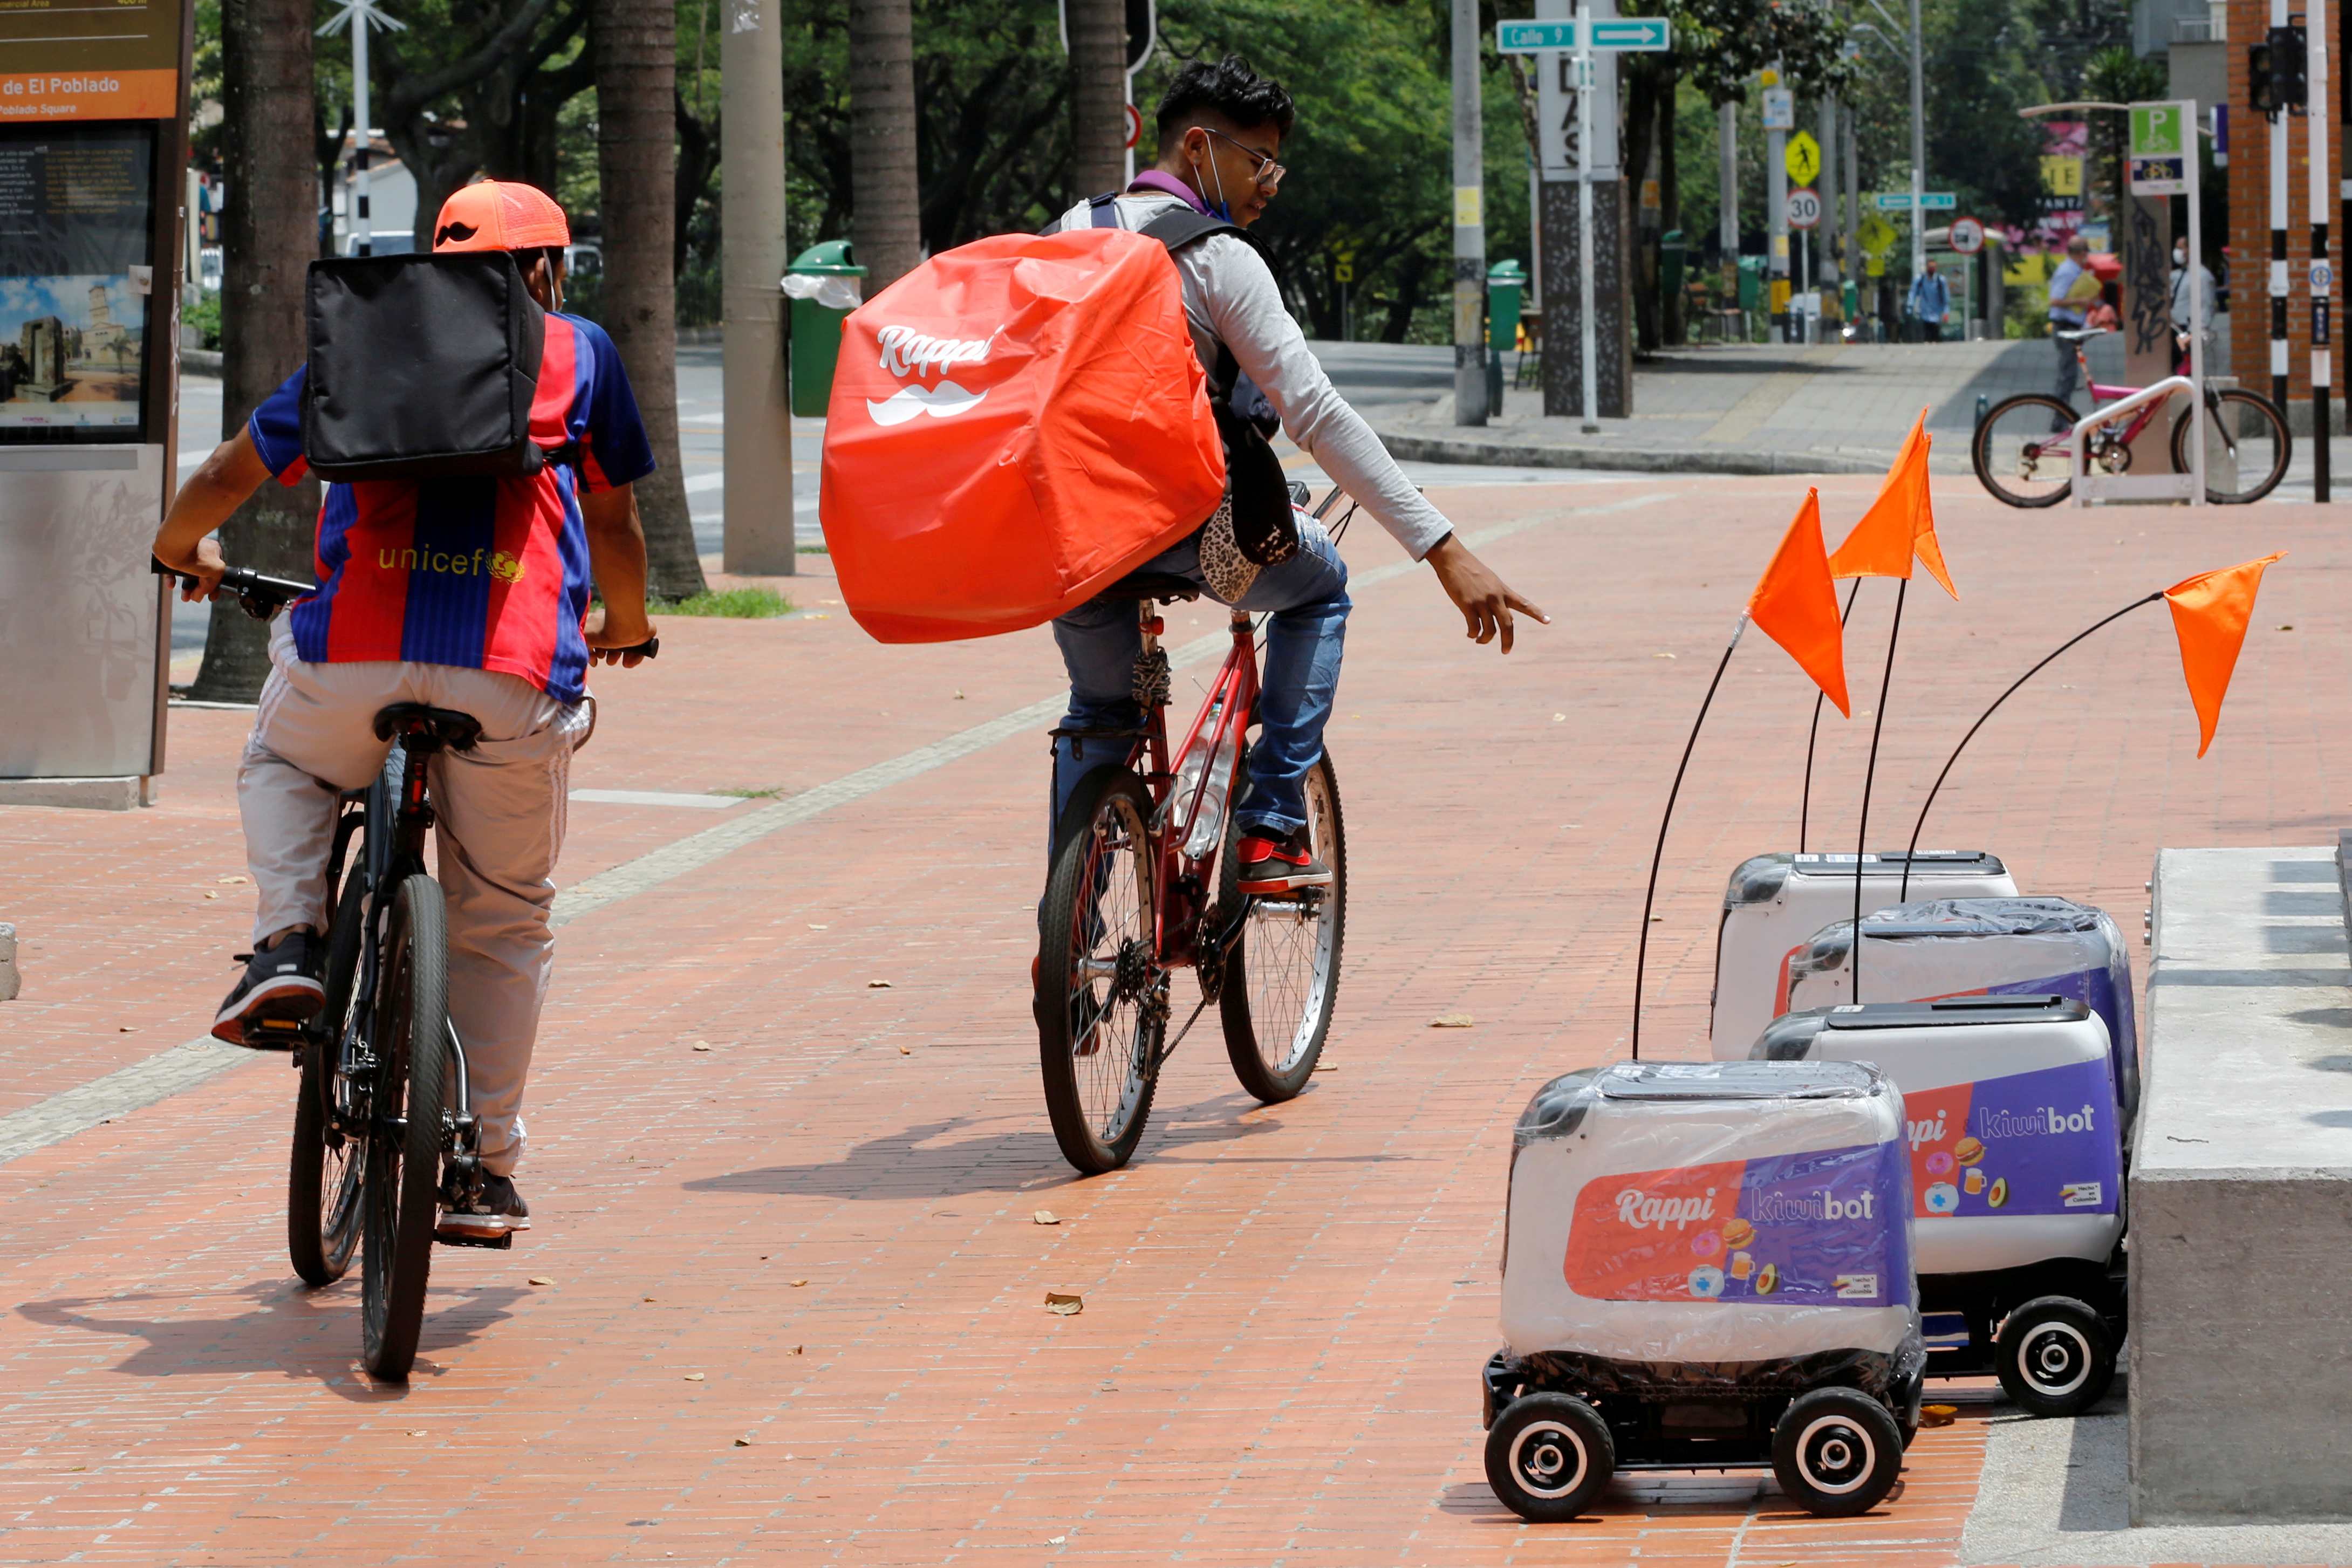 Rappi delivery workers observe delivery robots from the Colombian company Rappi, amid the coronavirus disease (COVID-19) outbreak in Medellin, Colombia April 17, 2020. REUTERS/David Estrada